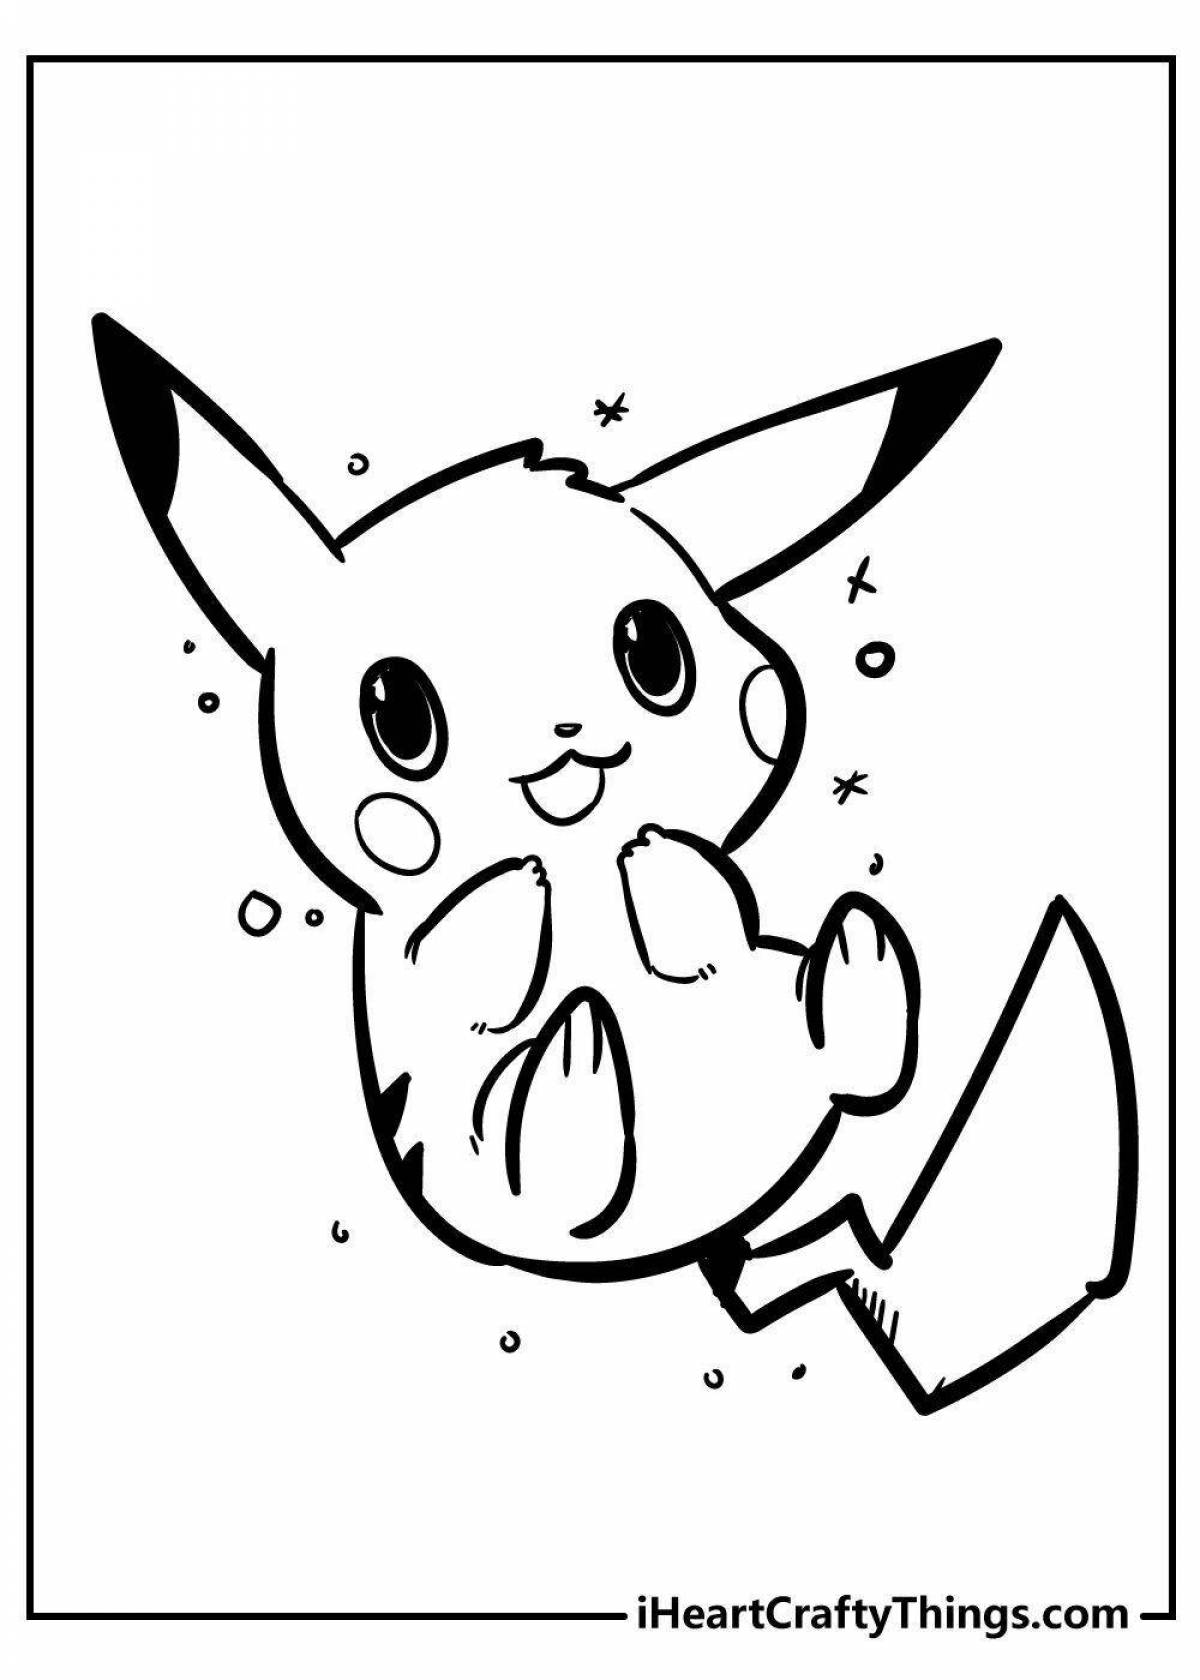 Adorable pikachu with a heart coloring book